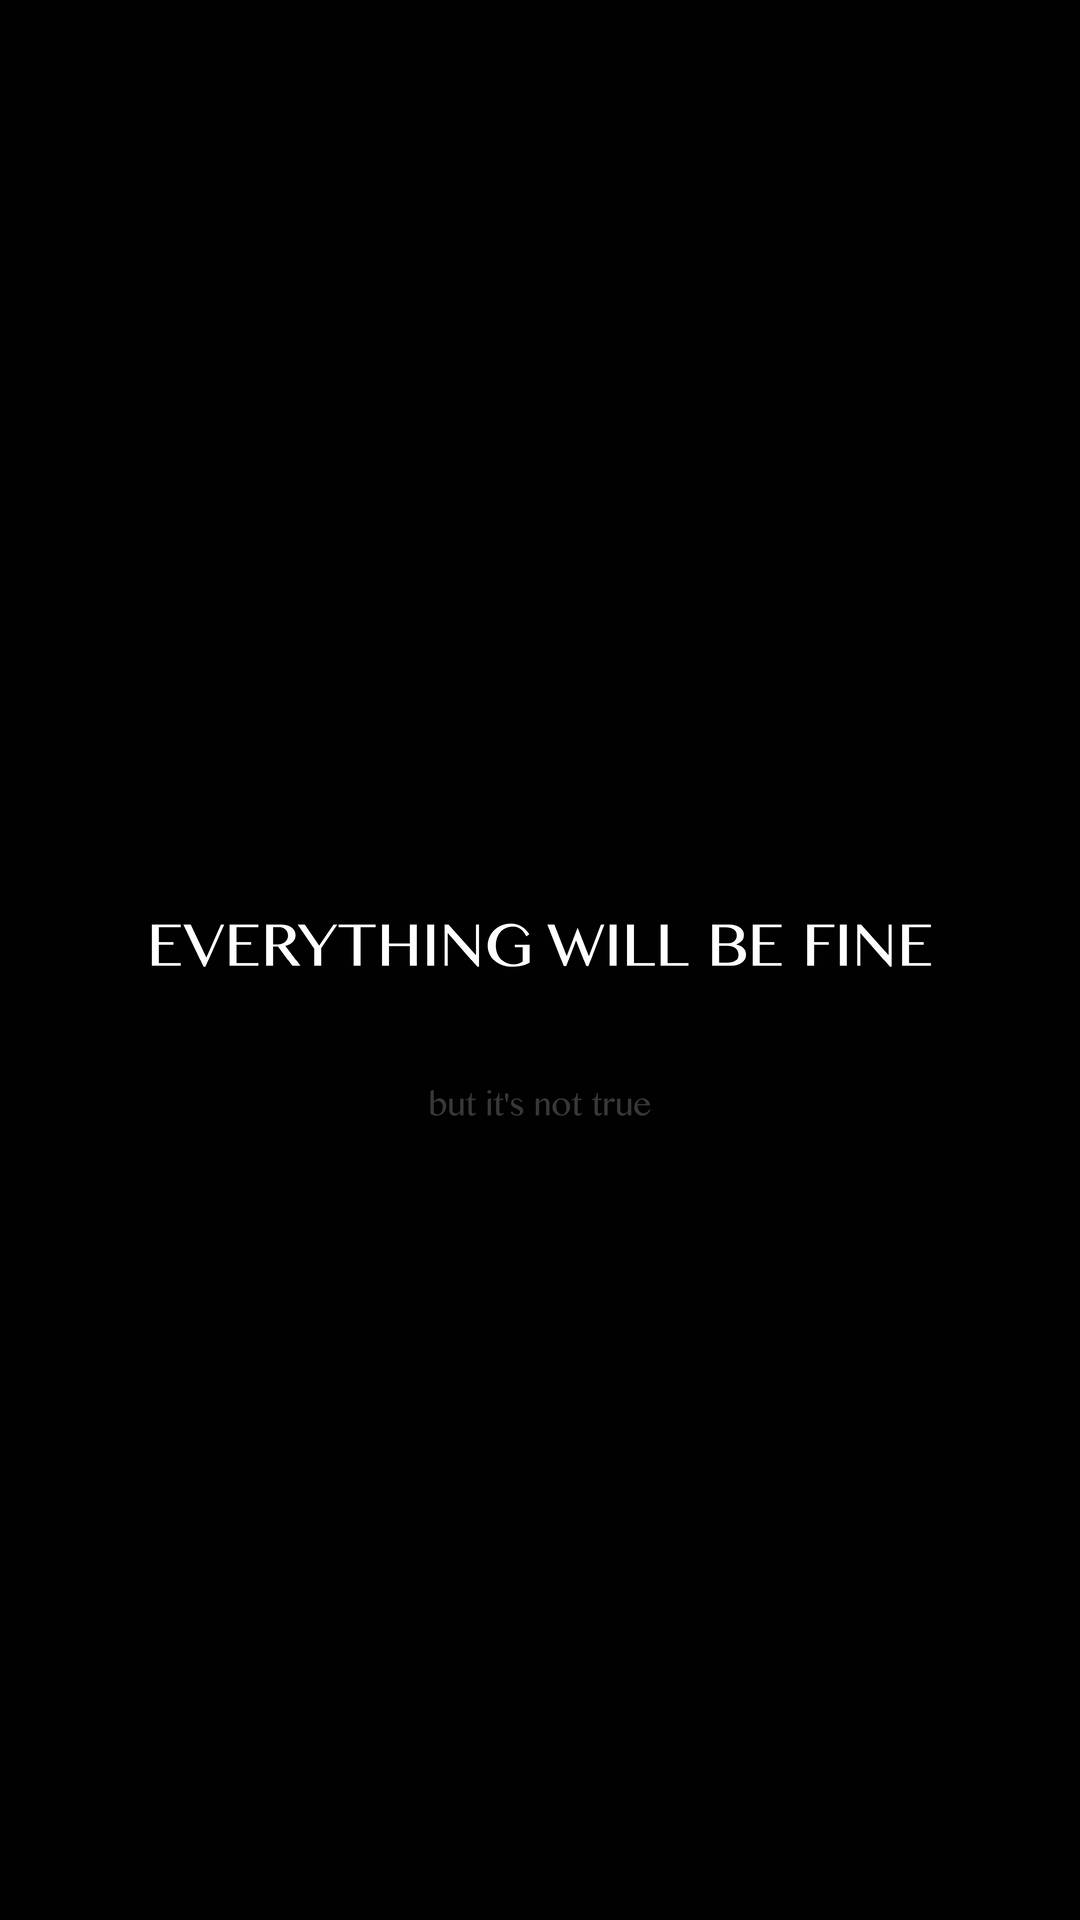 Everything Will Be Fine Inspirational Quote